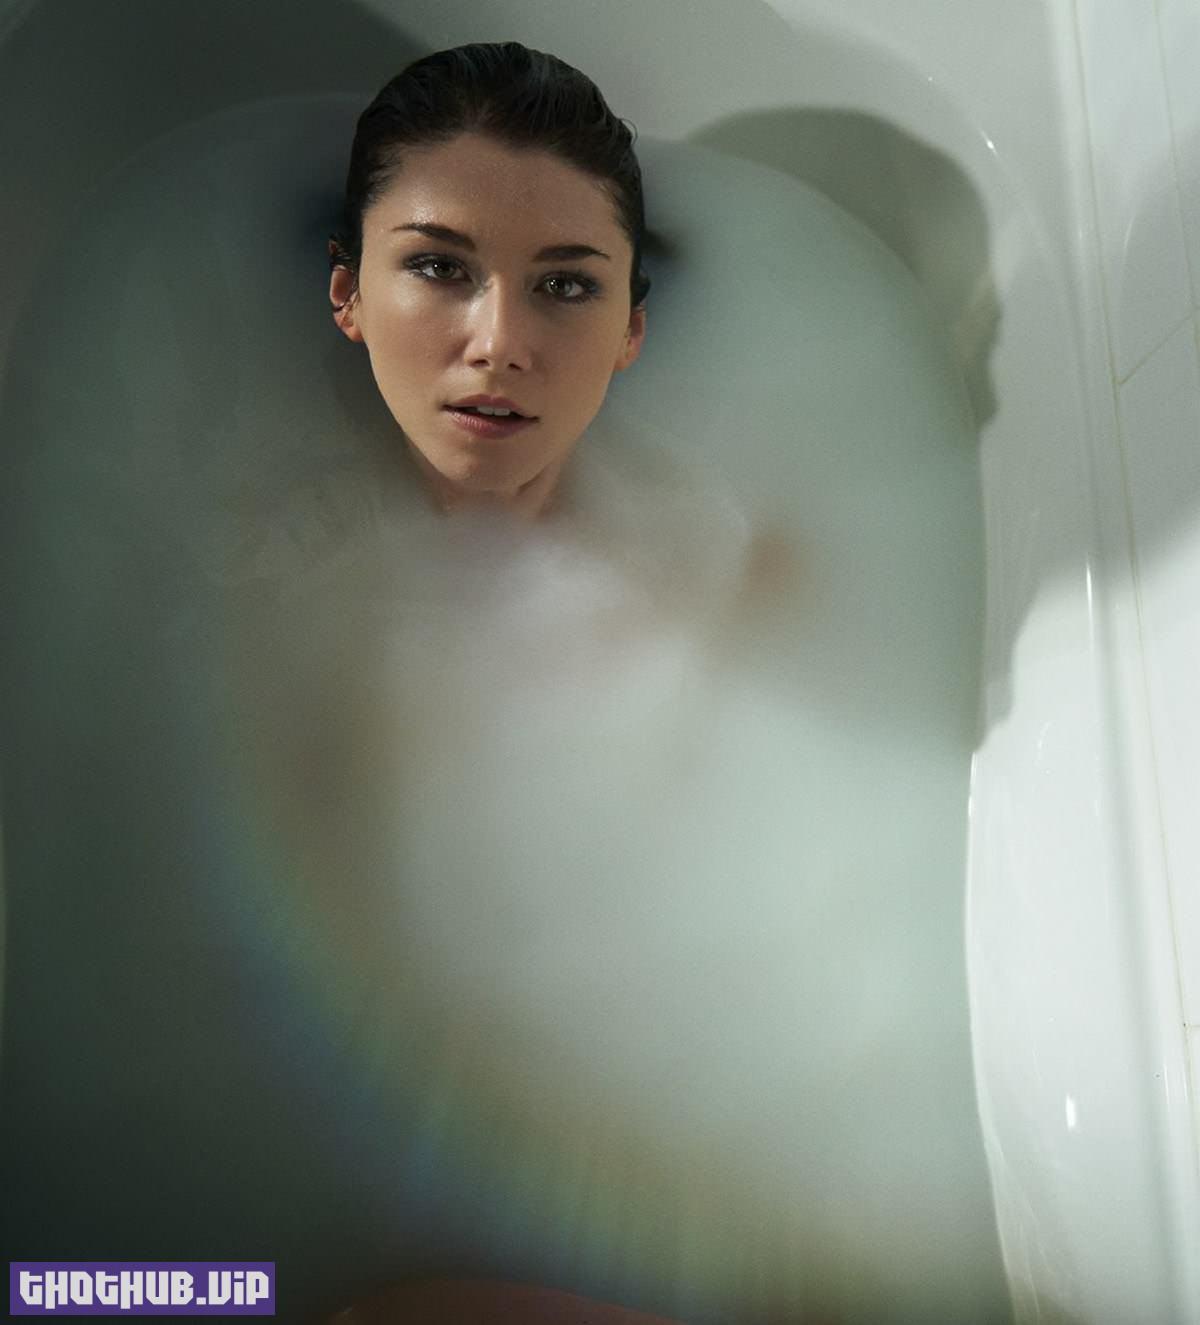 1696108273 522 Jewel Staite Nude And Sexy 59 Photos and Videos